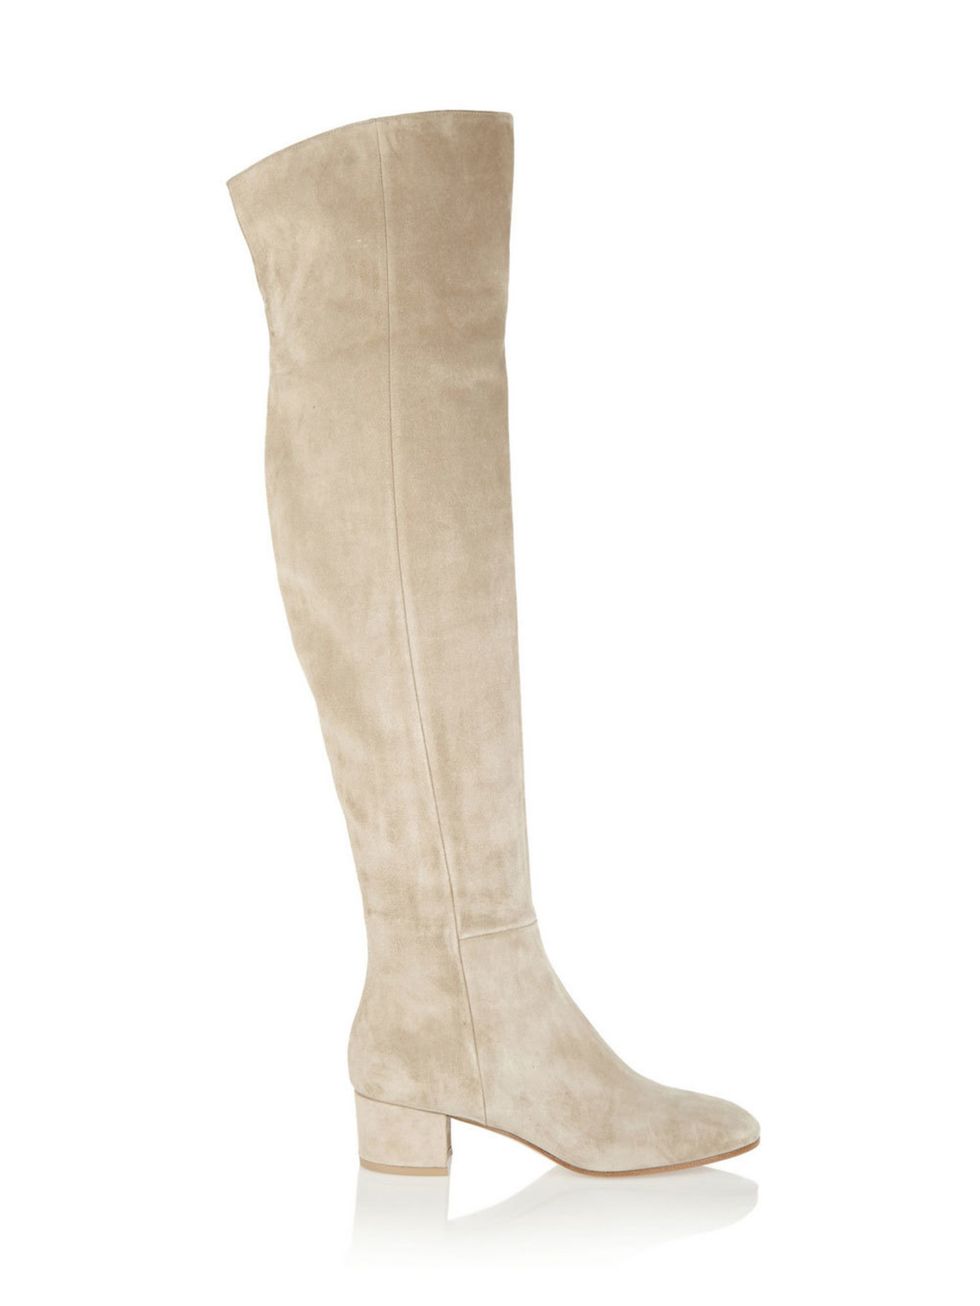 Brown, Boot, Tan, Khaki, Knee-high boot, Riding boot, Beige, Costume accessory, Foot, Leather, 